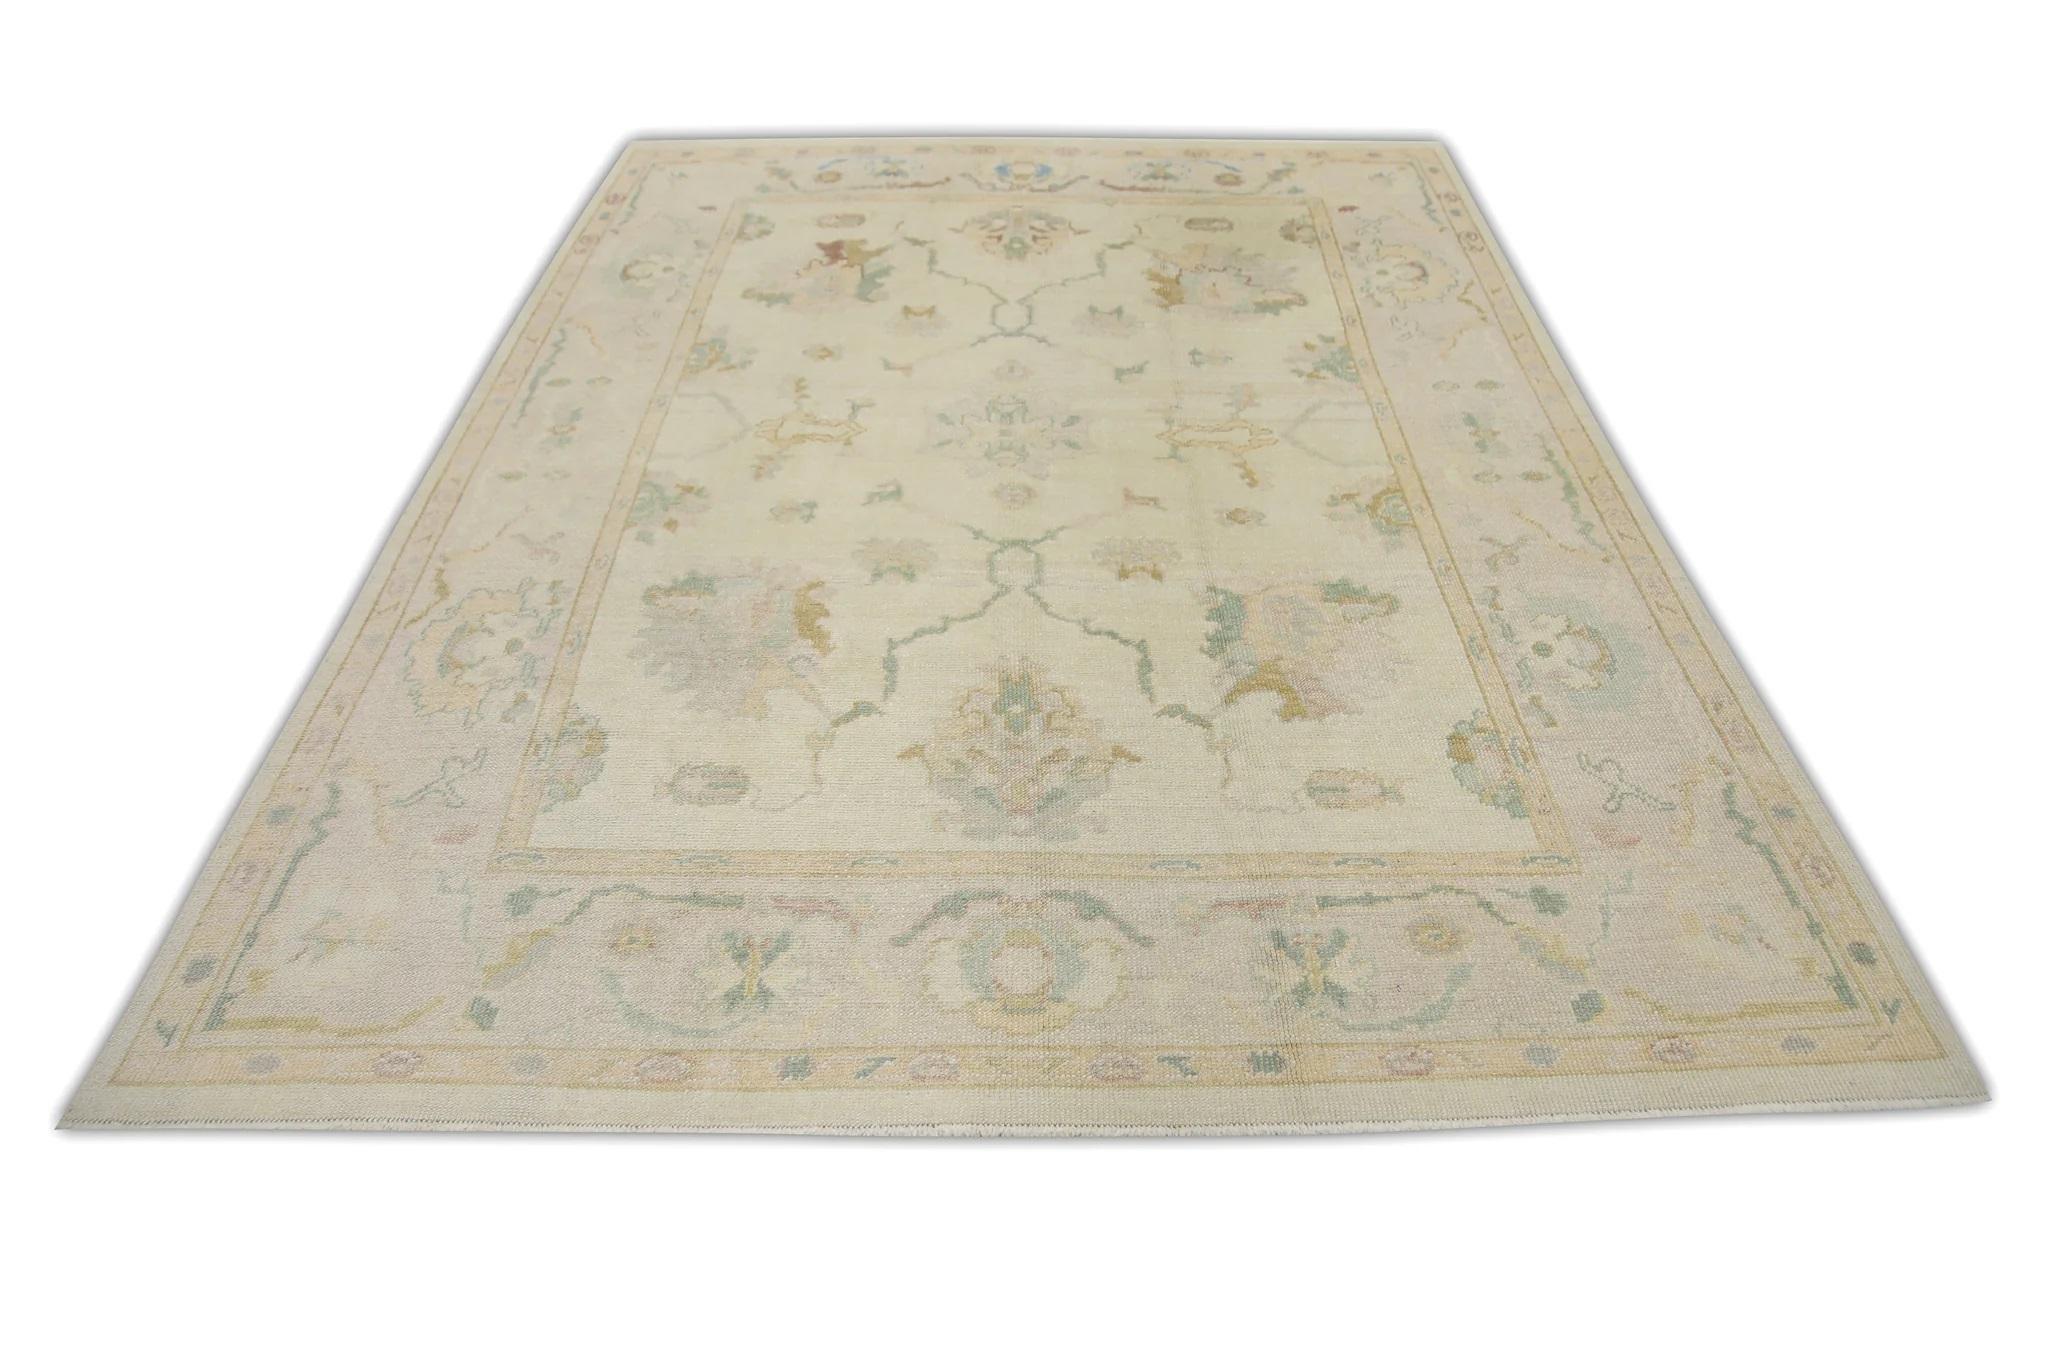 Handwoven Wool Floral Turkish Oushak Rug in Soft Pink, Green, Blue 6'10